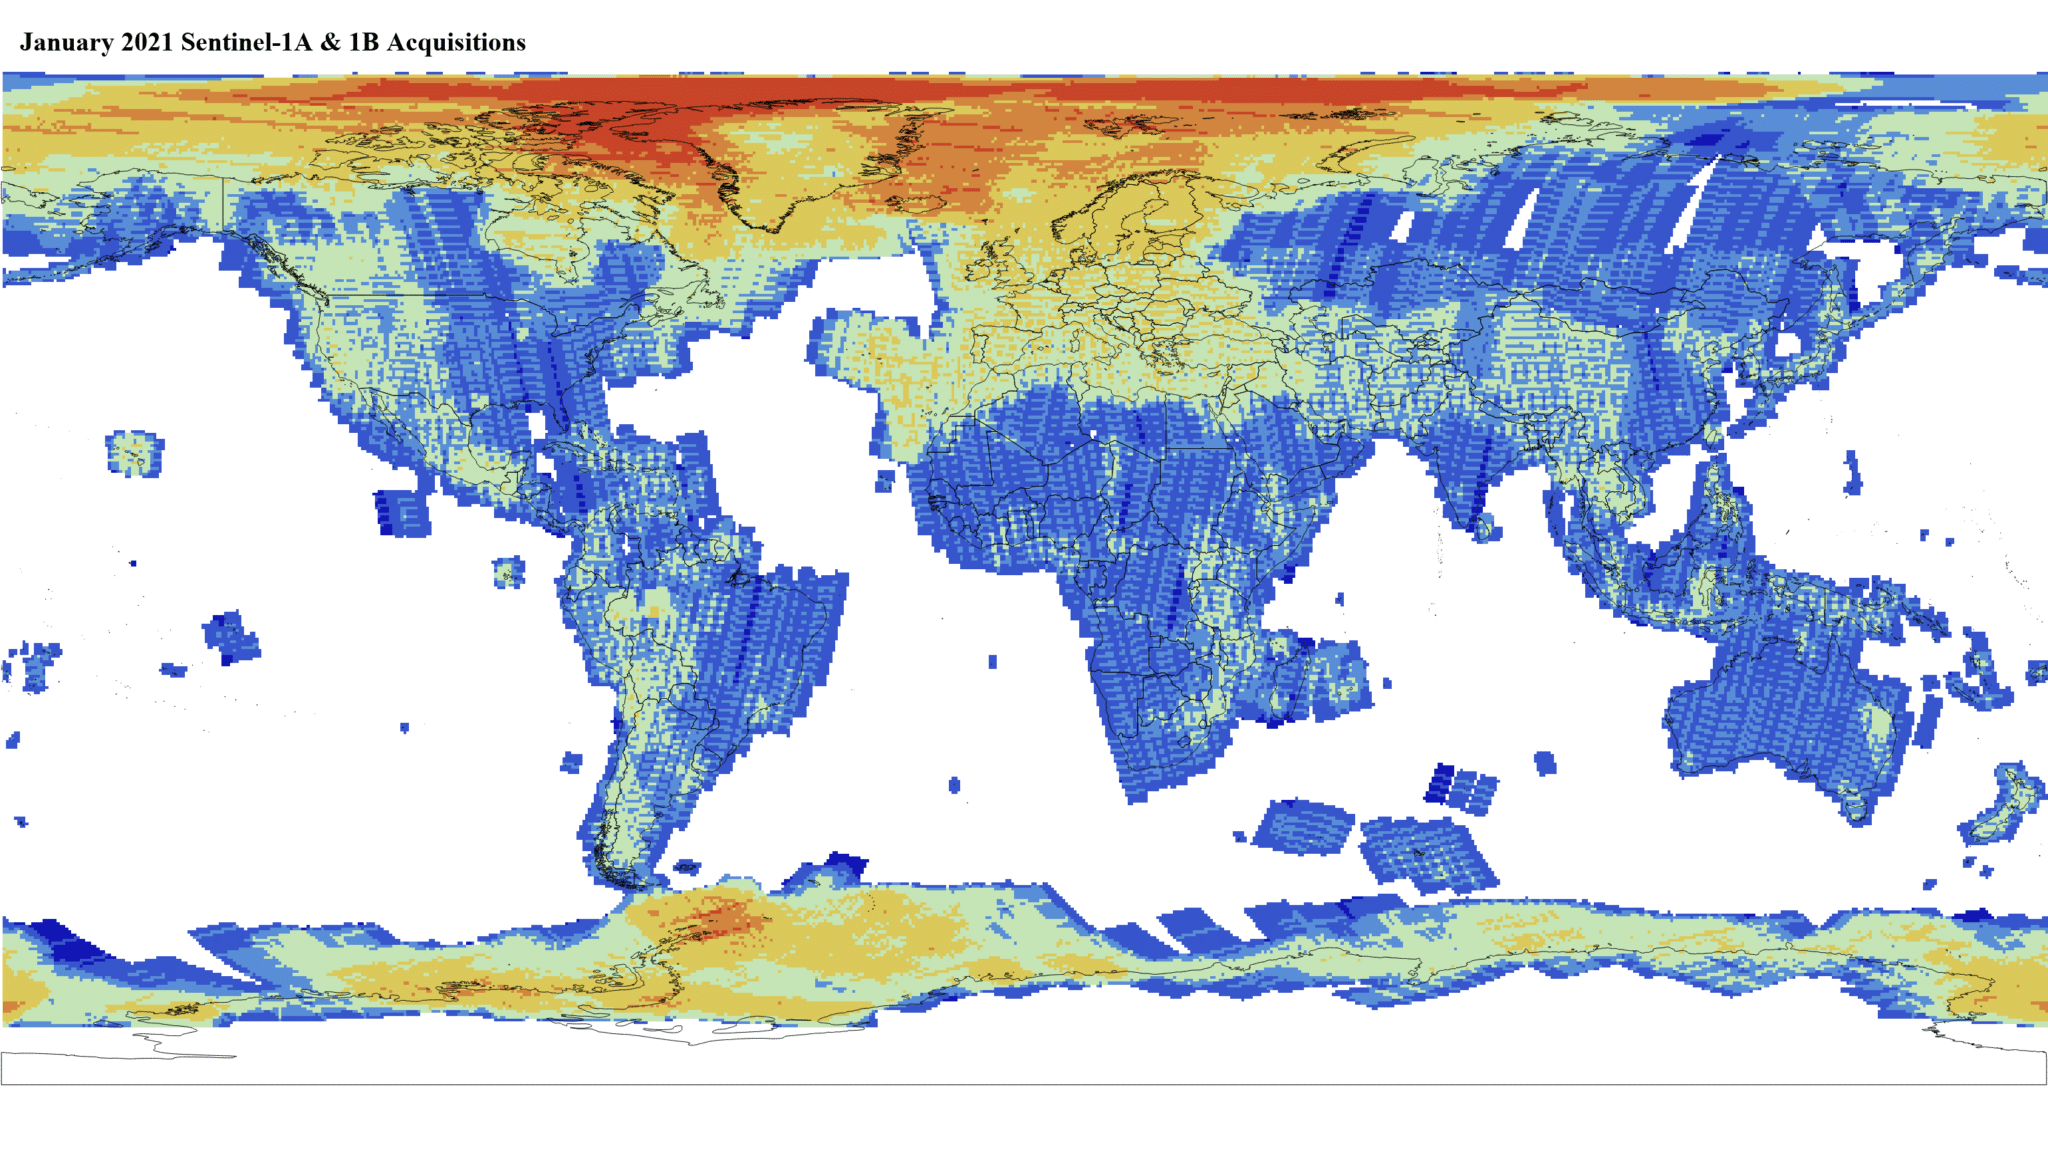 Heat map of Sentinel-1A and -1B GRD global acquisitions January 2021